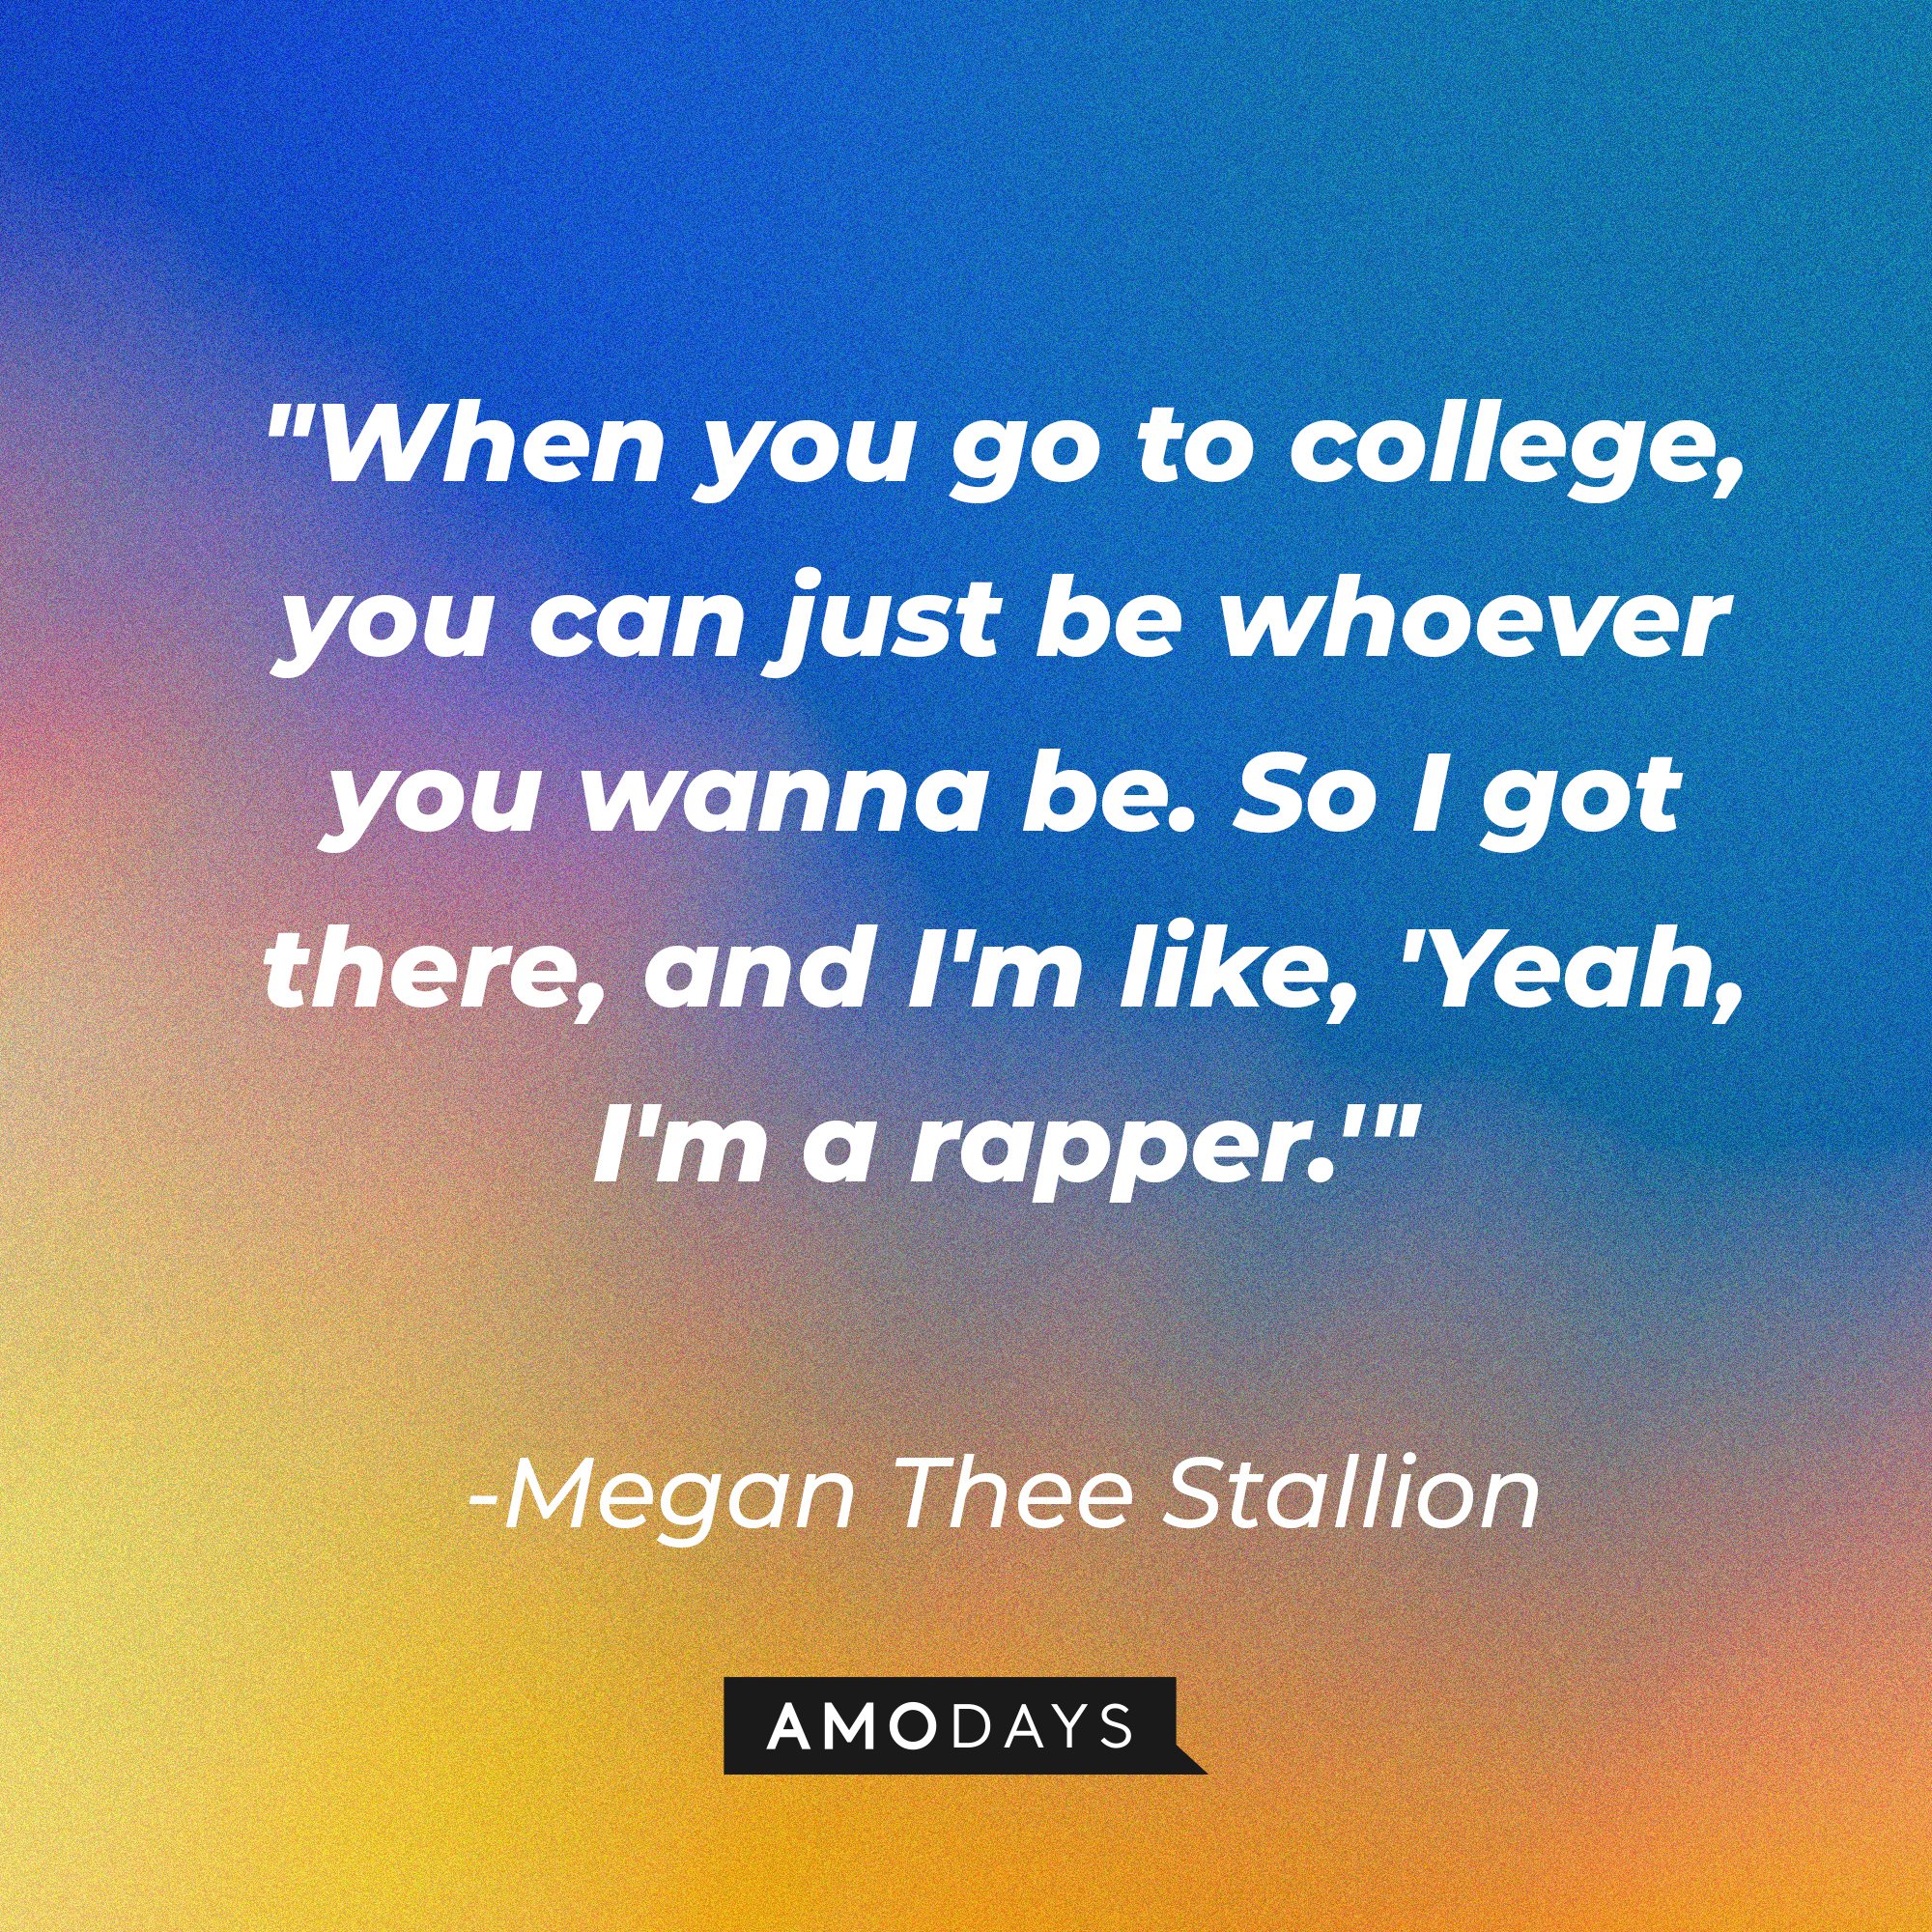 Megan Thee Stallion’s quote: "When you go to college, you can just be whoever you wanna be. So I got there, and I'm like, 'Yeah, I'm a rapper.'" | Image: AmoDays